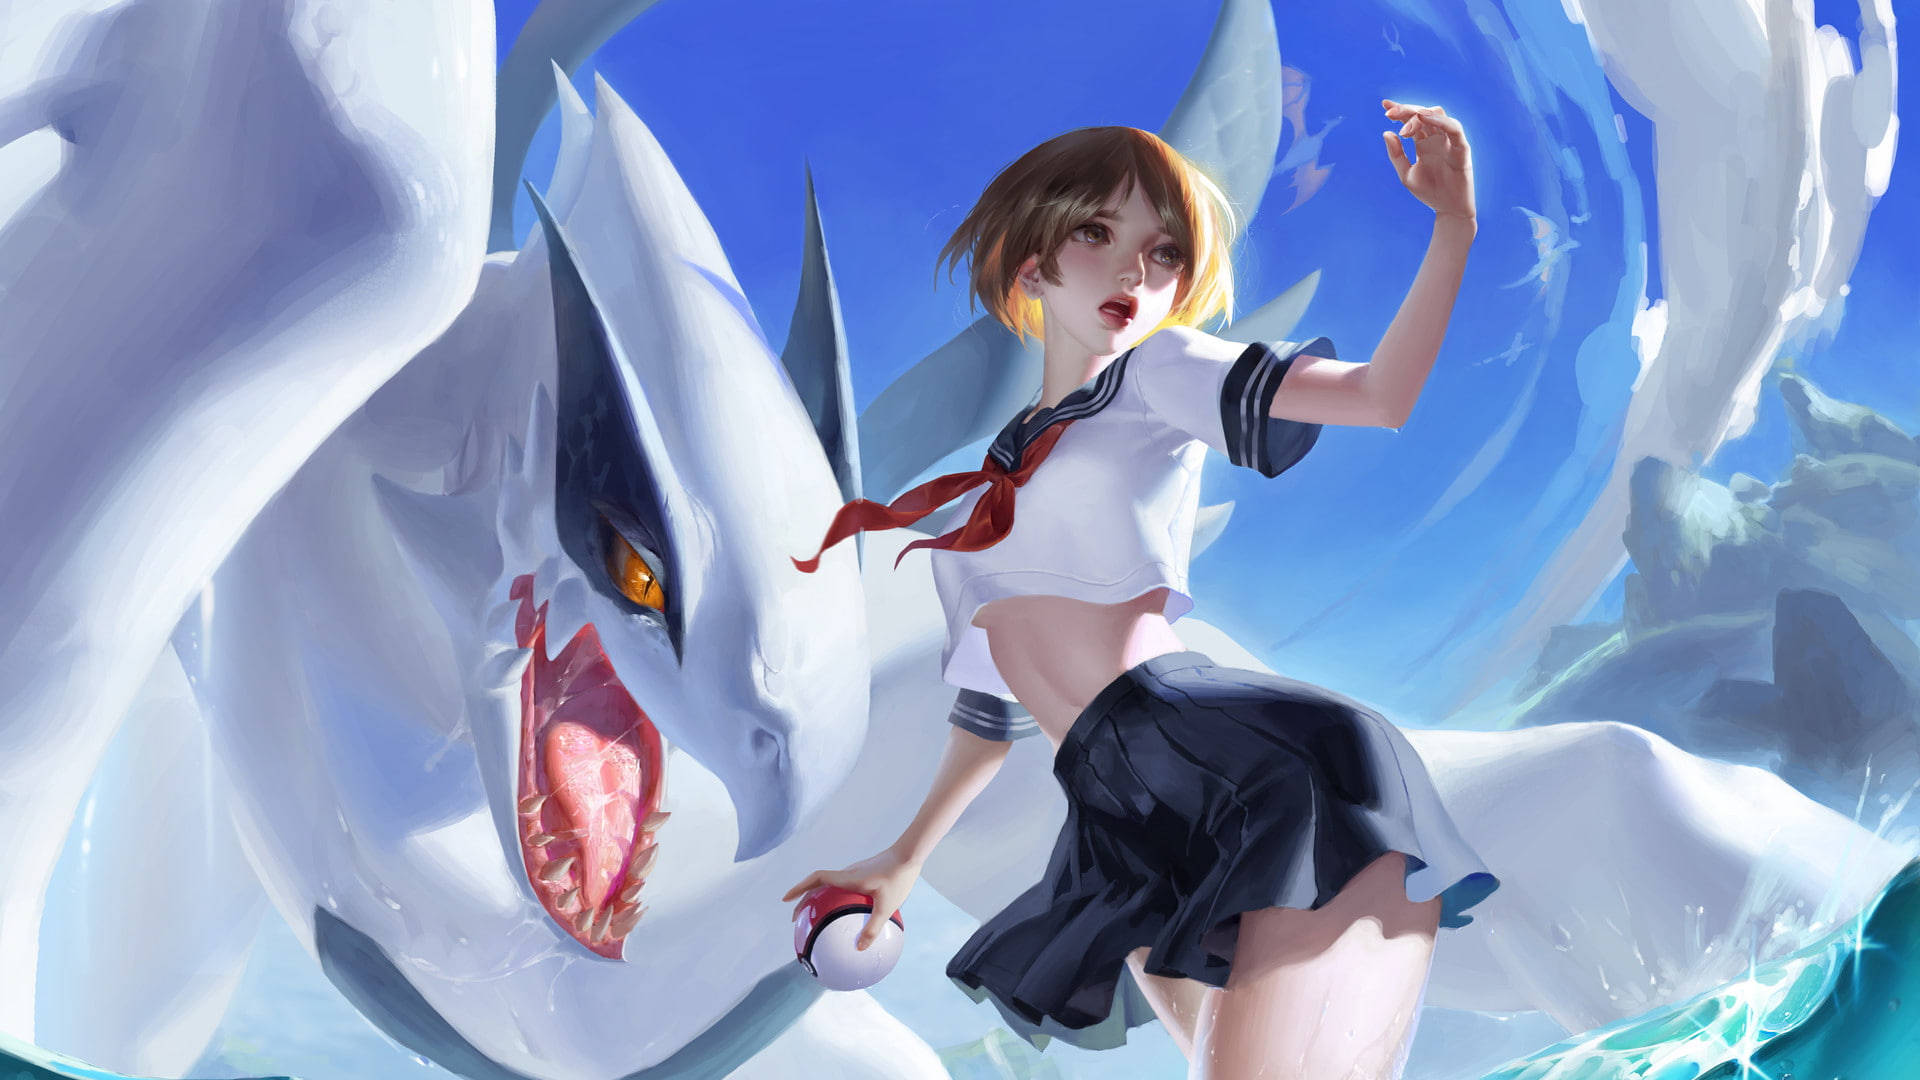 Explore the magical world of Lugia with an anime girl Wallpaper